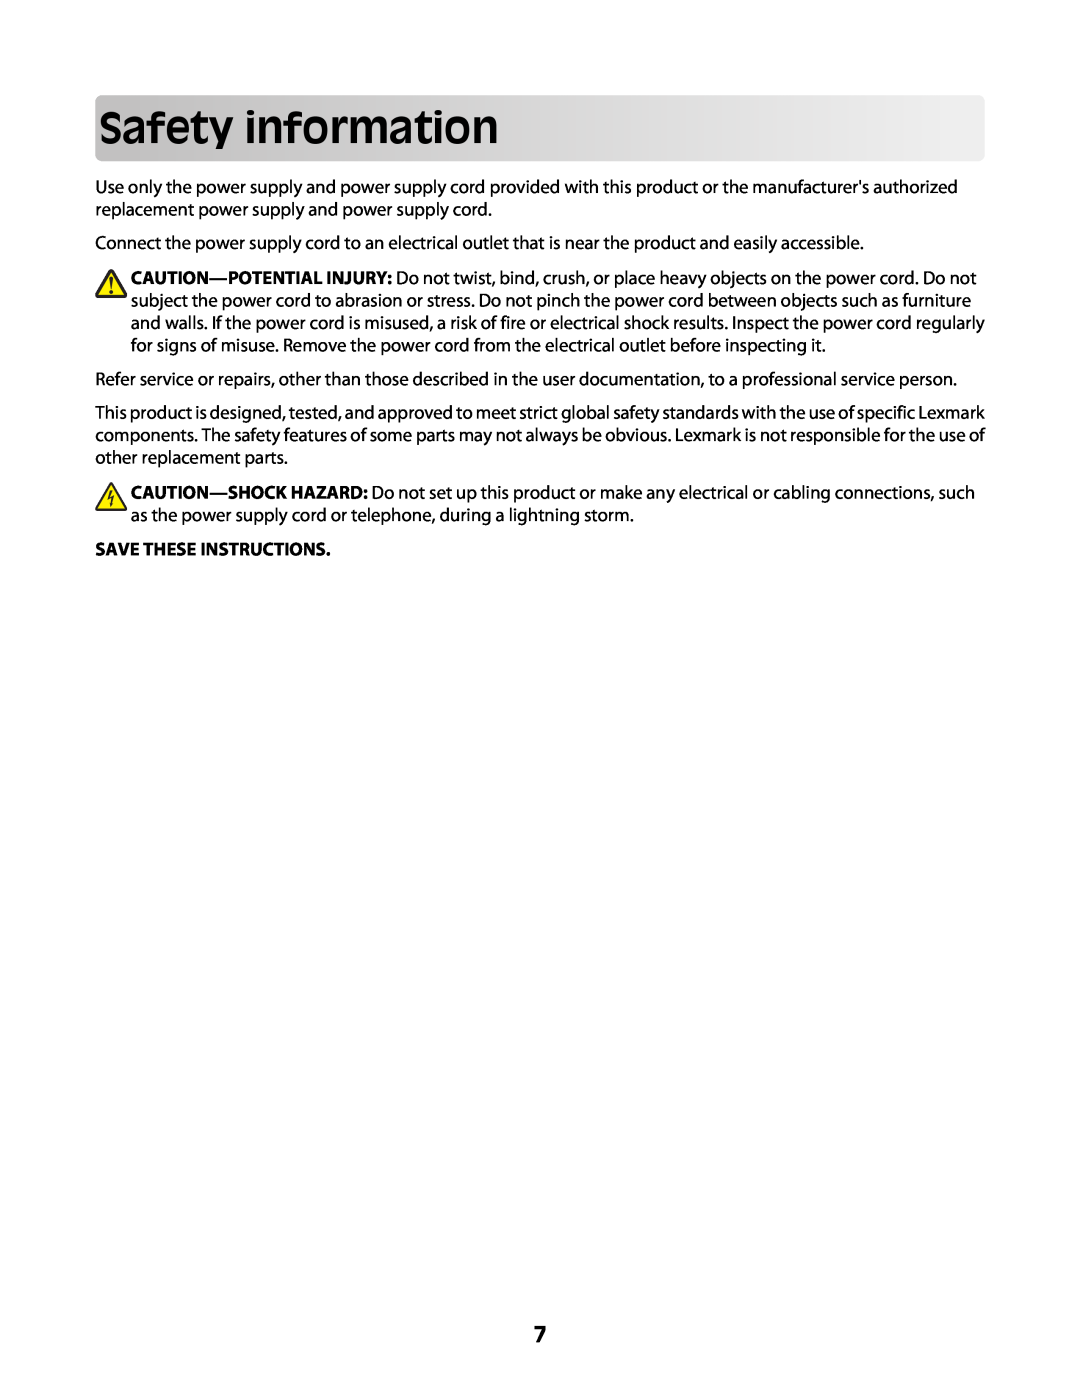 Lexmark Z2400 Series manual Safetyinformation, Save These Instructions 